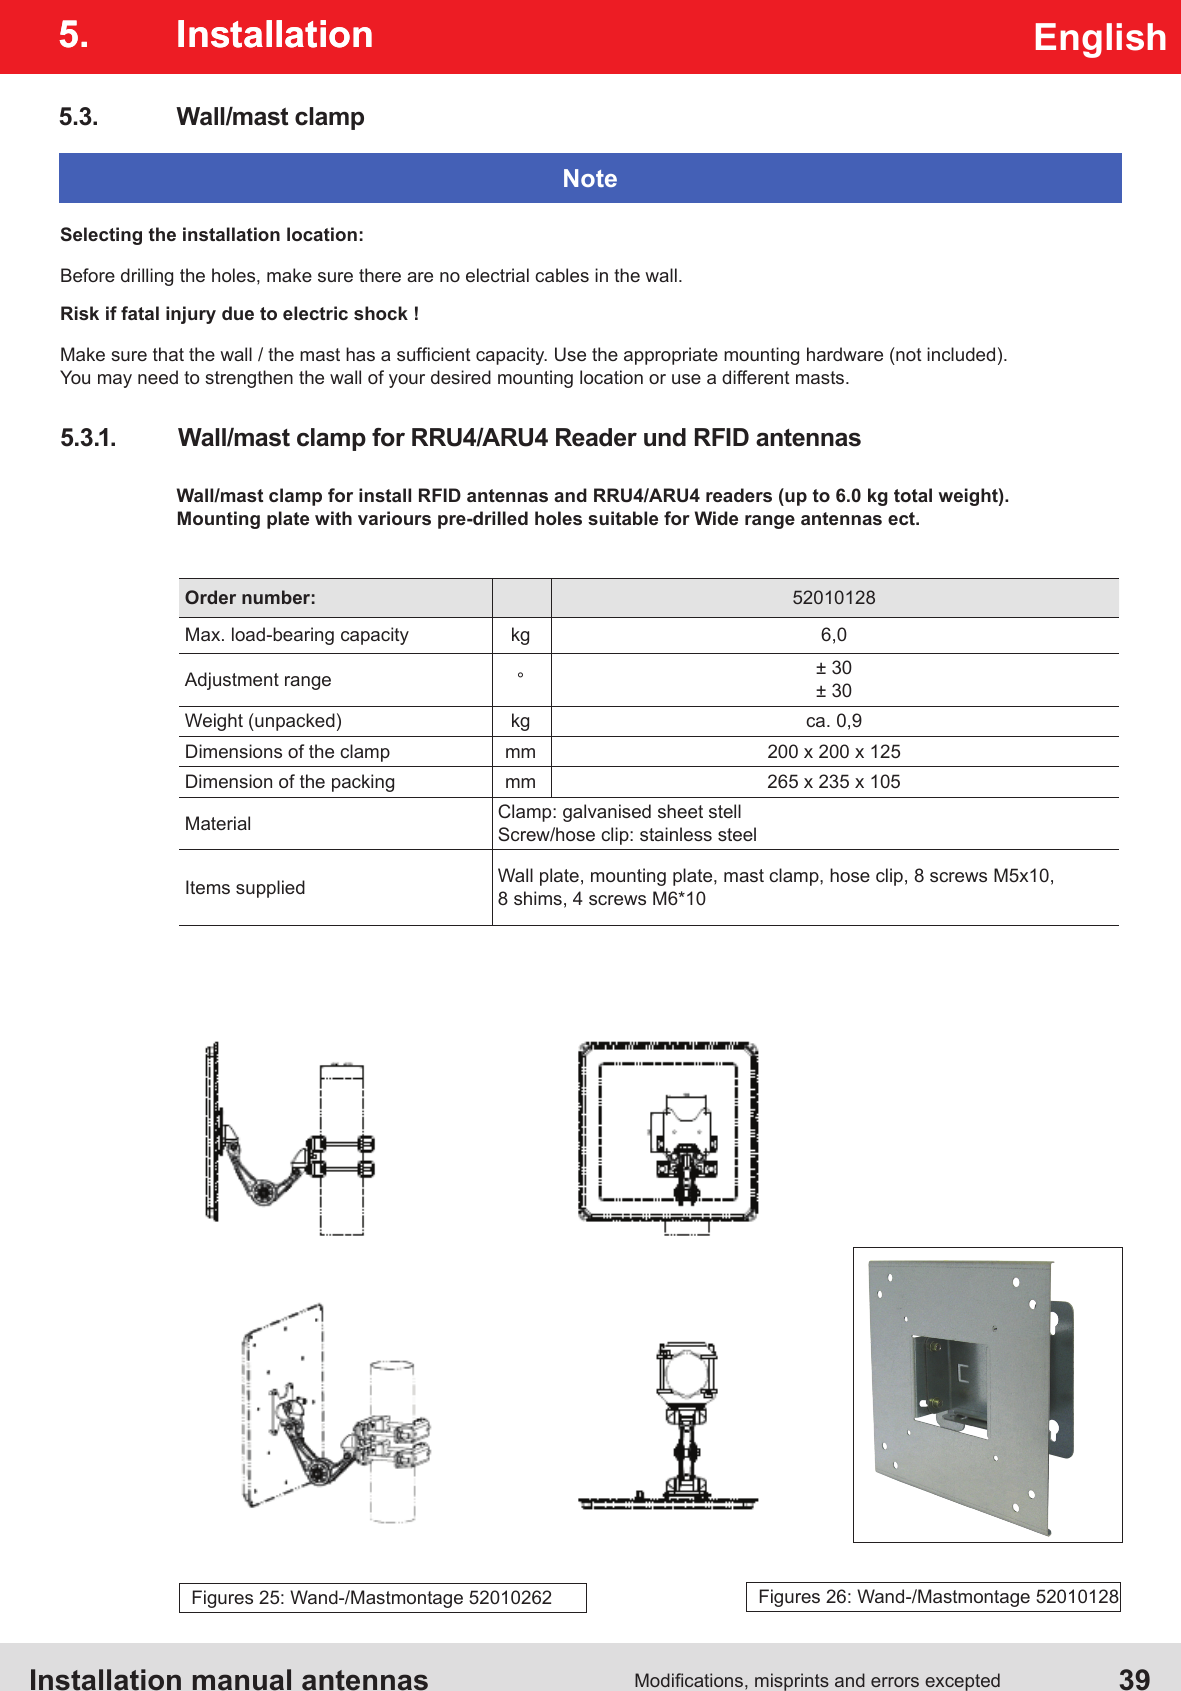 Installation manual antennas   39Modications, misprints and errors exceptedEnglish5. InstallationWall/mast clamp for install RFID antennas and RRU4/ARU4 readers (up to 6.0 kg total weight). Mounting plate with variours pre-drilled holes suitable for Wide range antennas ect.Order number: 52010128Max. load-bearing capacity kg 6,0Adjustment range °± 30± 30Weight (unpacked) kg ca. 0,9Dimensions of the clamp mm 200 x 200 x 125Dimension of the packing mm 265 x 235 x 105Material Clamp: galvanised sheet stellScrew/hose clip: stainless steelItems supplied Wall plate, mounting plate, mast clamp, hose clip, 8 screws M5x10, 8 shims, 4 screws M6*105.3.  Wall/mast clampSelecting the installation location:Before drilling the holes, make sure there are no electrial cables in the wall.Risk if fatal injury due to electric shock !Make sure that the wall / the mast has a sufcient capacity. Use the appropriate mounting hardware (not included). You may need to strengthen the wall of your desired mounting location or use a different masts.Note5.3.1.  Wall/mast clamp for RRU4/ARU4 Reader und RFID antennas5. InstallationFigures 25: Wand-/Mastmontage 52010262 Figures 26: Wand-/Mastmontage 52010128